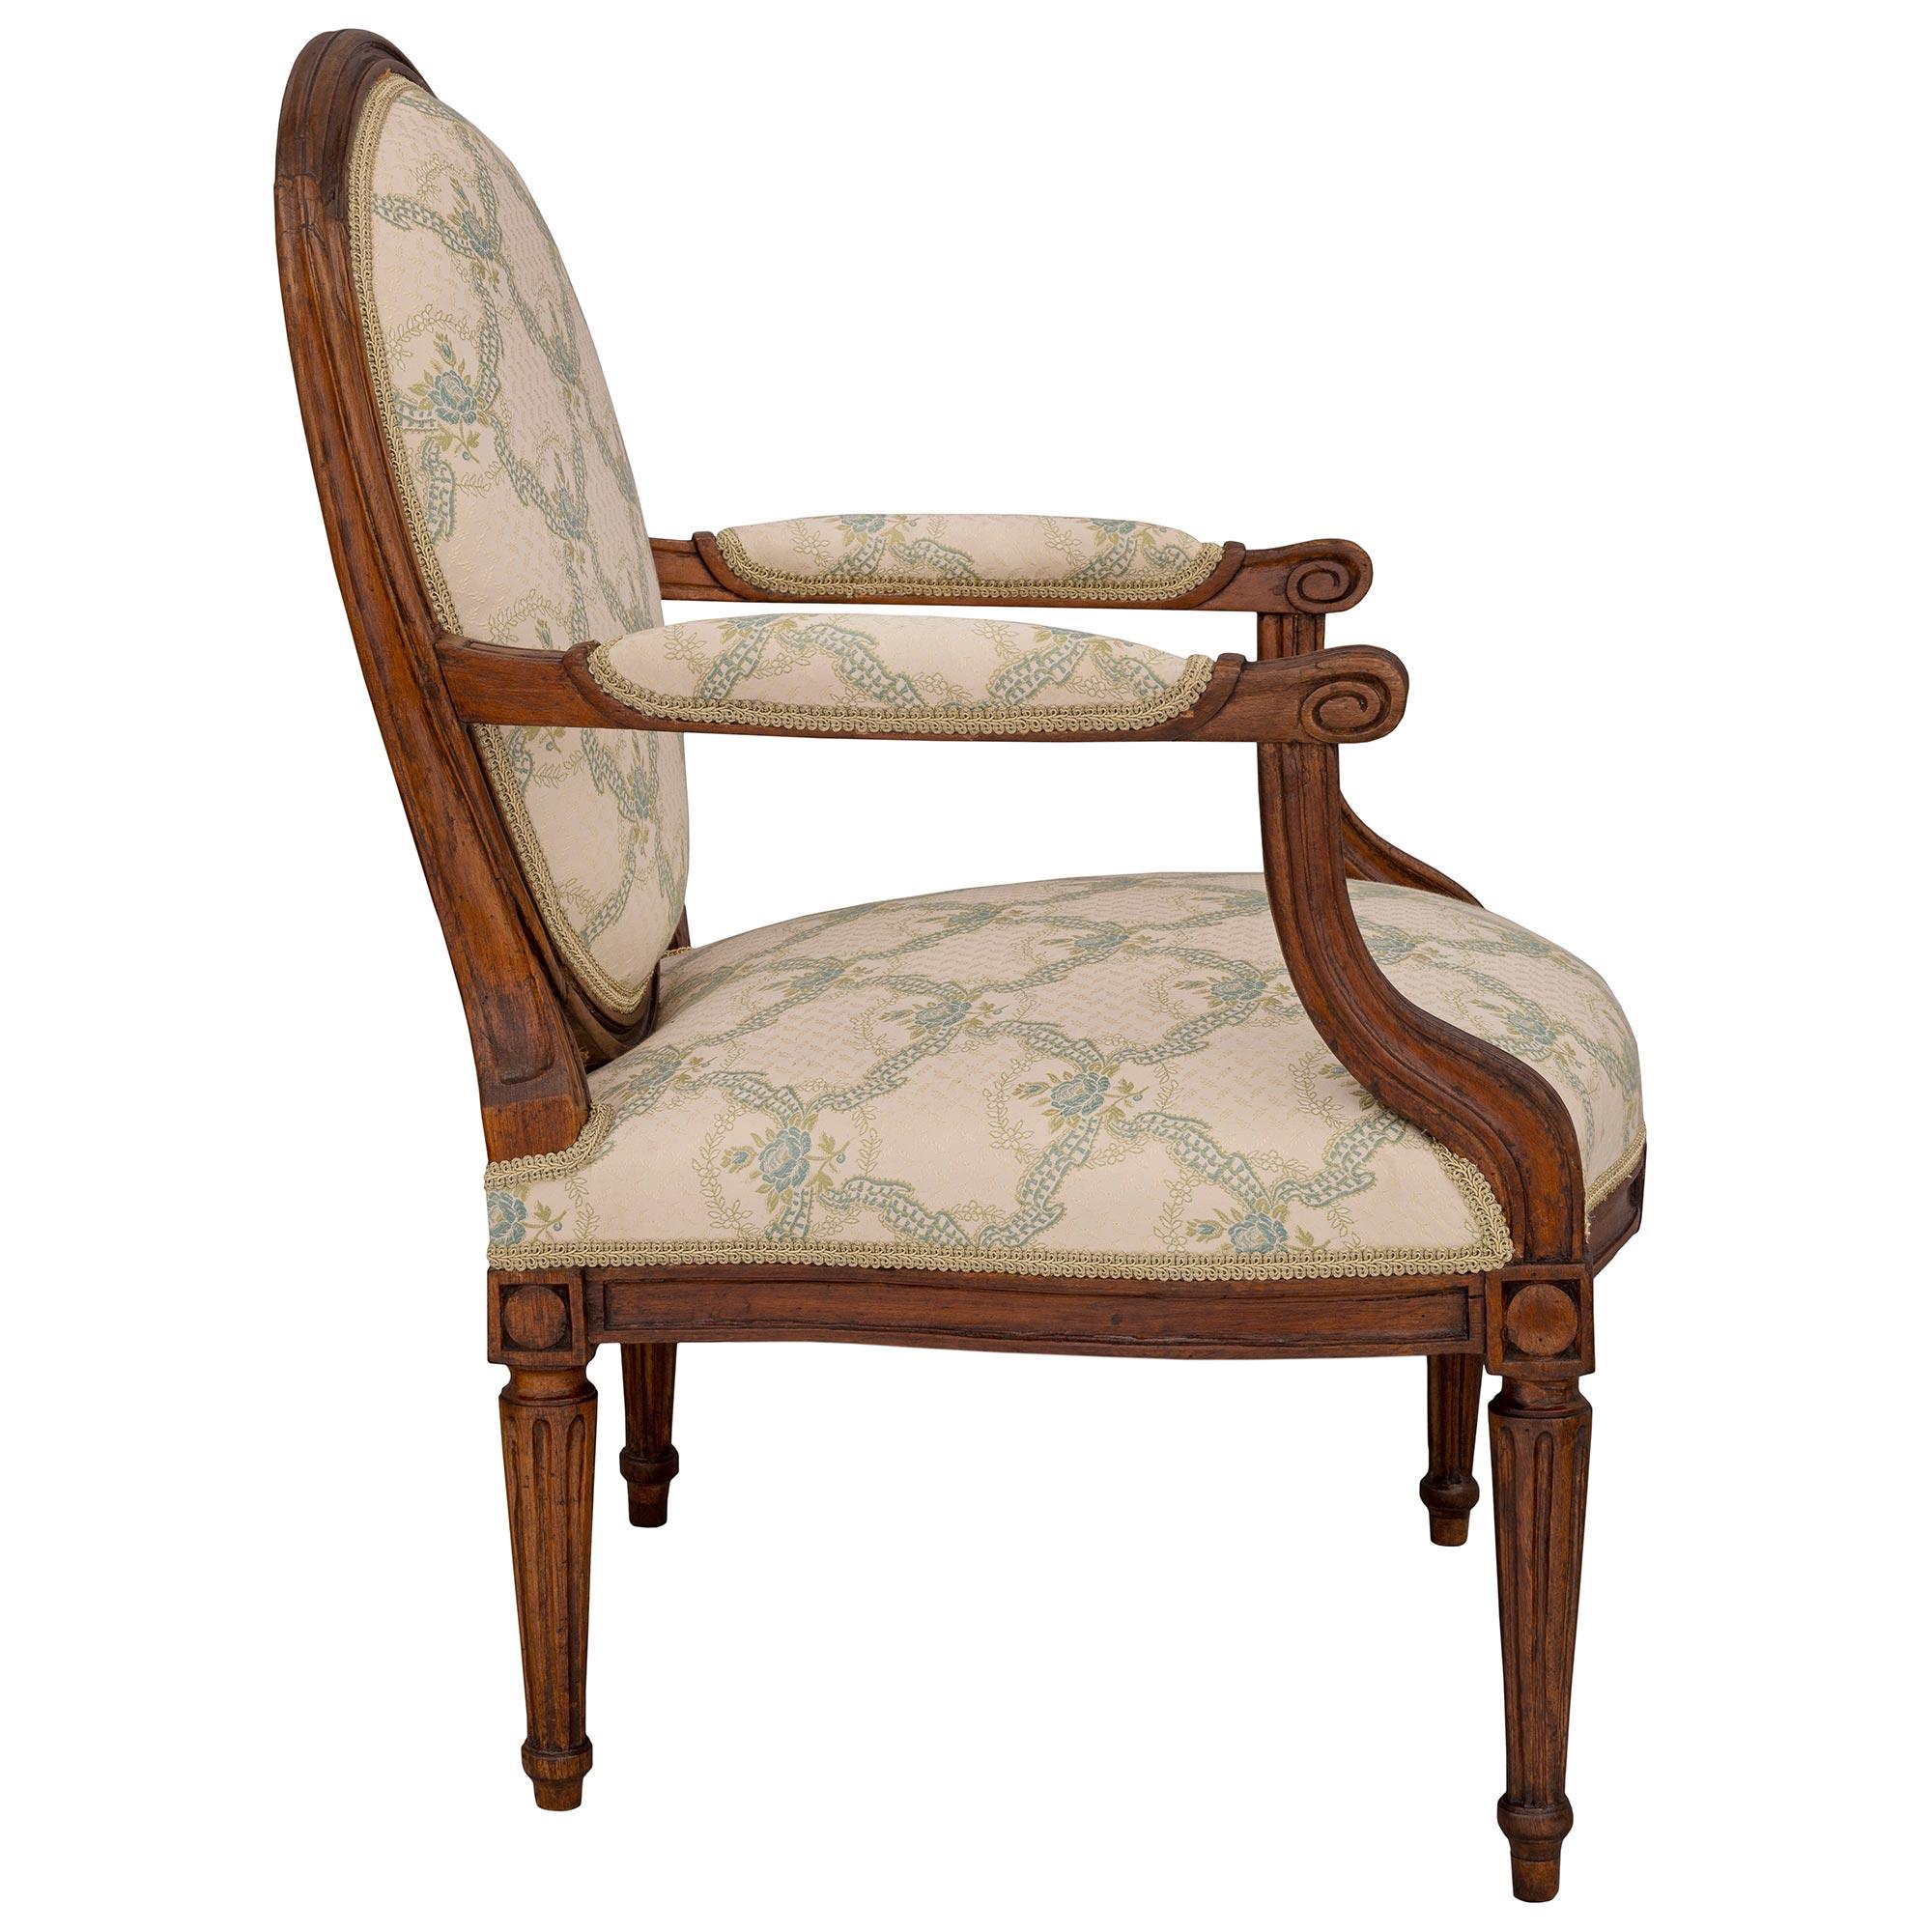 French 18th Century Louis XVI Period Walnut Armchair, circa 1760 In Good Condition For Sale In West Palm Beach, FL